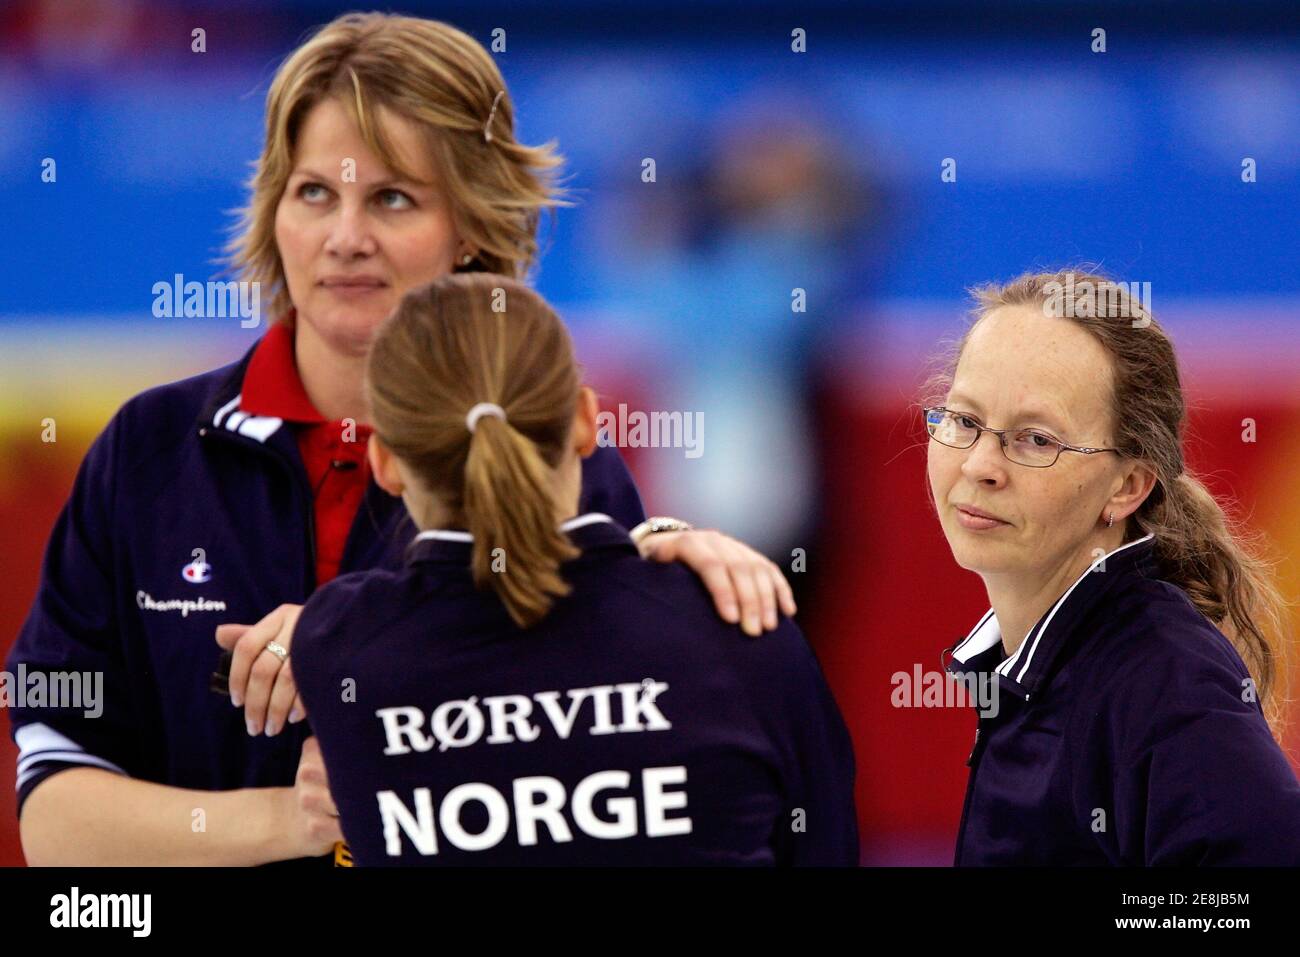 Norway's Dordi Nordby (R), Marianne Halsum (L) and Marianne Roervik stand during their loss to Canada during the women's curling bronze medal match at the Torino 2006 Winter Olympic Games in Pinerolo, Italy, February 23, 2006. Canada defeated Norway 11-5 in eight ends of play. REUTERS/Jerry Lampen Stock Photo